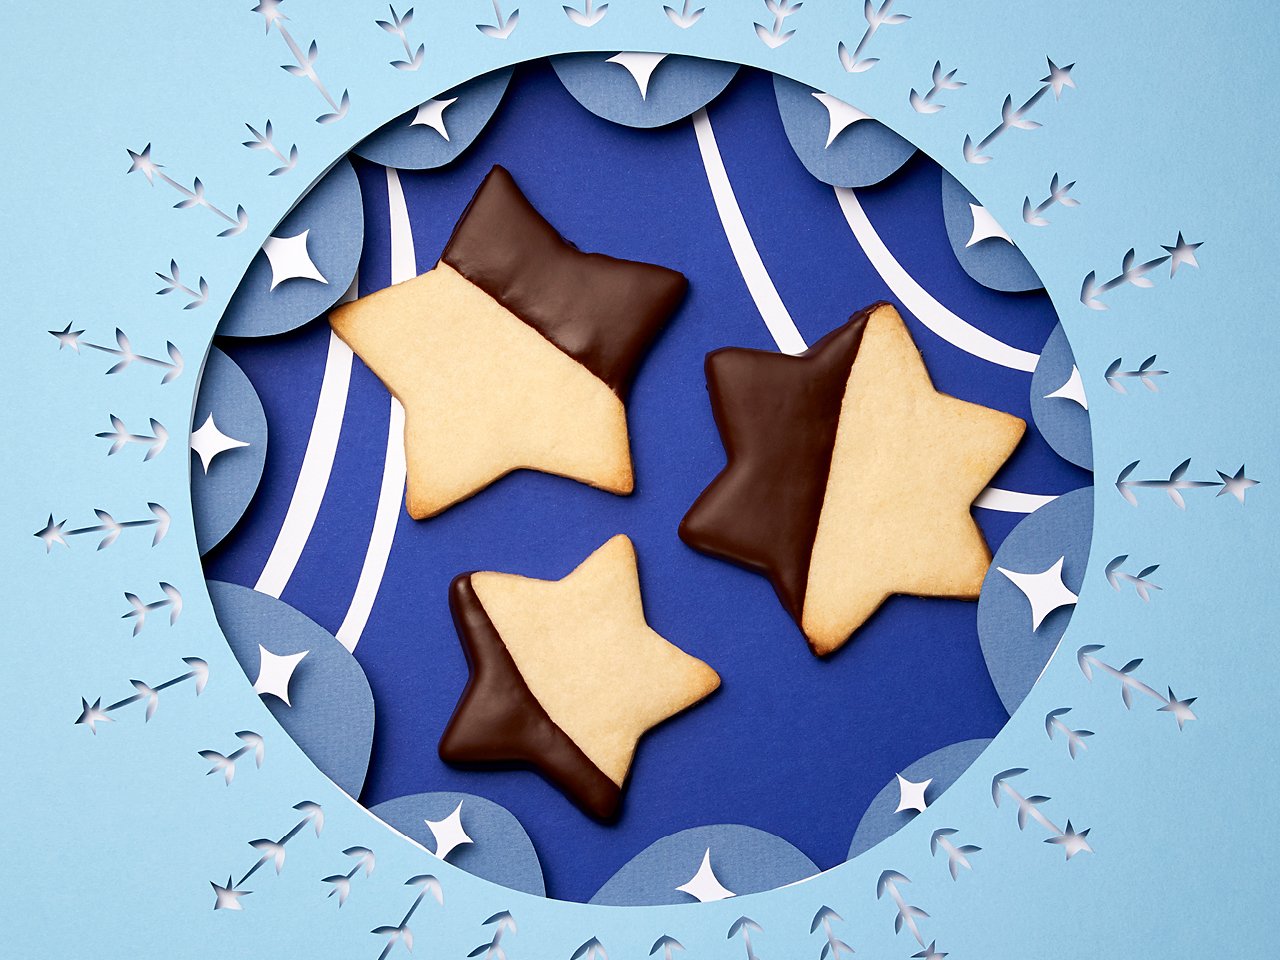 Dutch Bakery & Diner’s Chocolate-Dipped Star Cookies